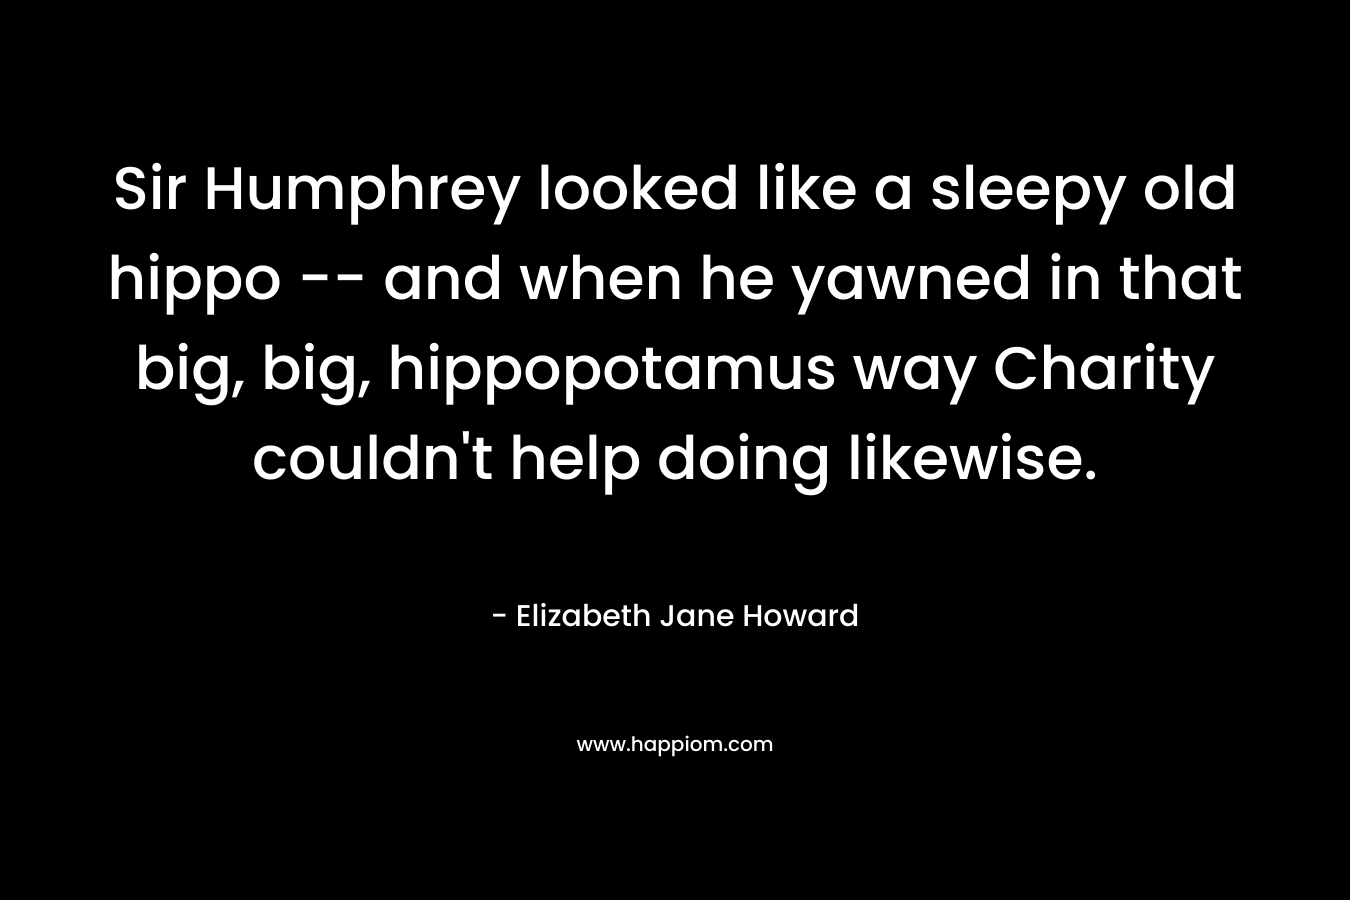 Sir Humphrey looked like a sleepy old hippo — and when he yawned in that big, big, hippopotamus way Charity couldn’t help doing likewise. – Elizabeth Jane Howard